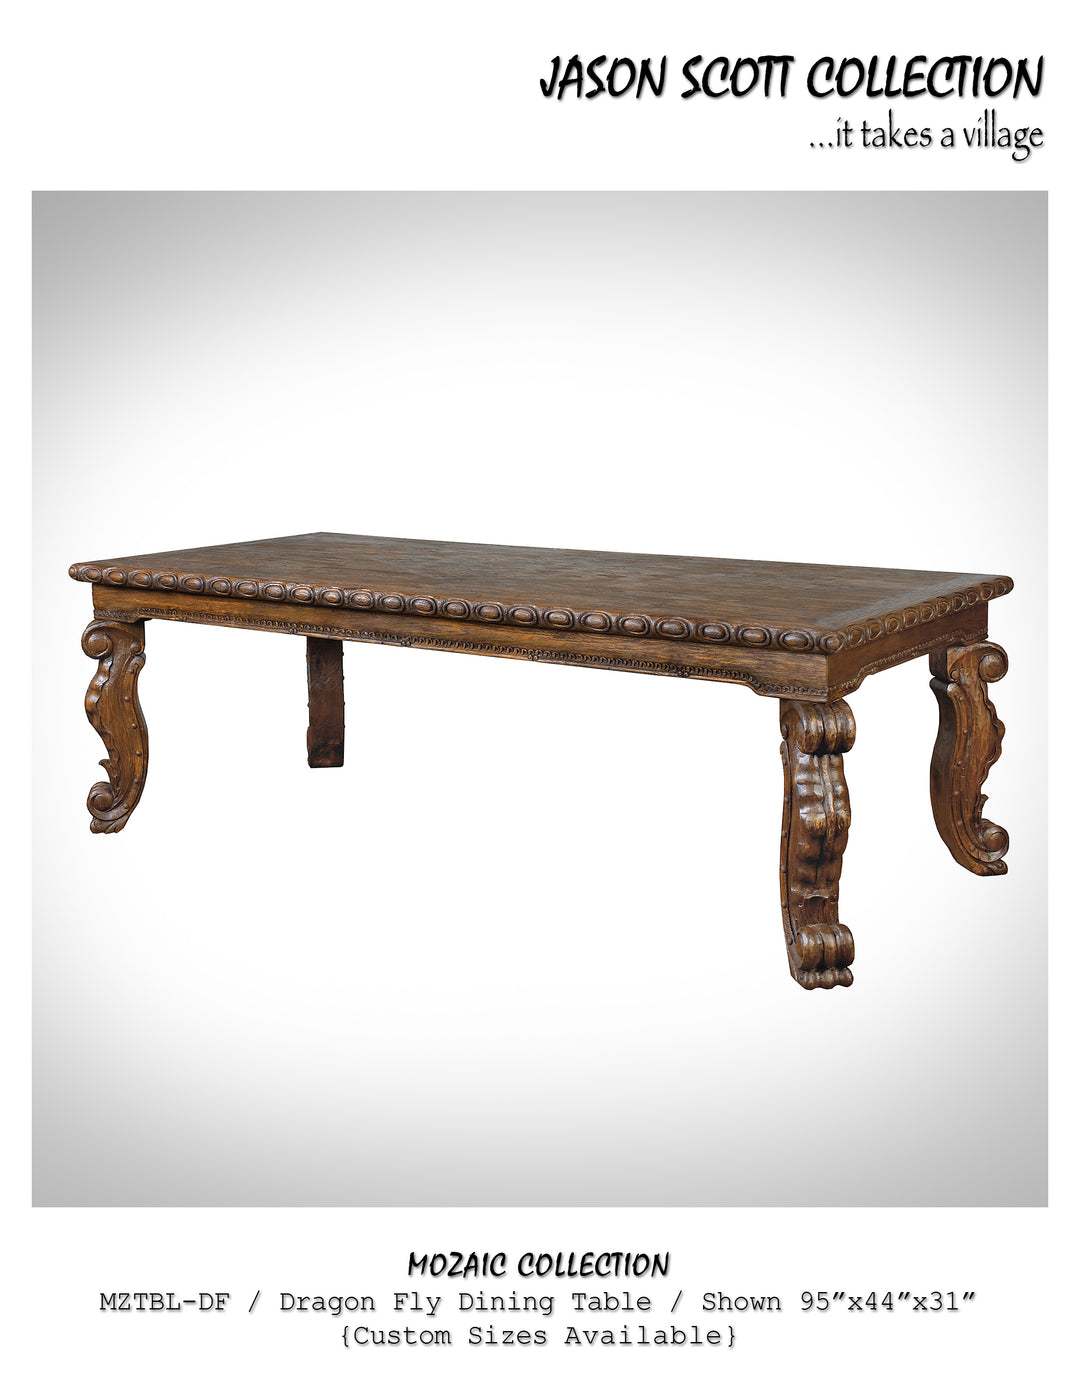 Dragon Fly Dining Table (Mozaic Collection)